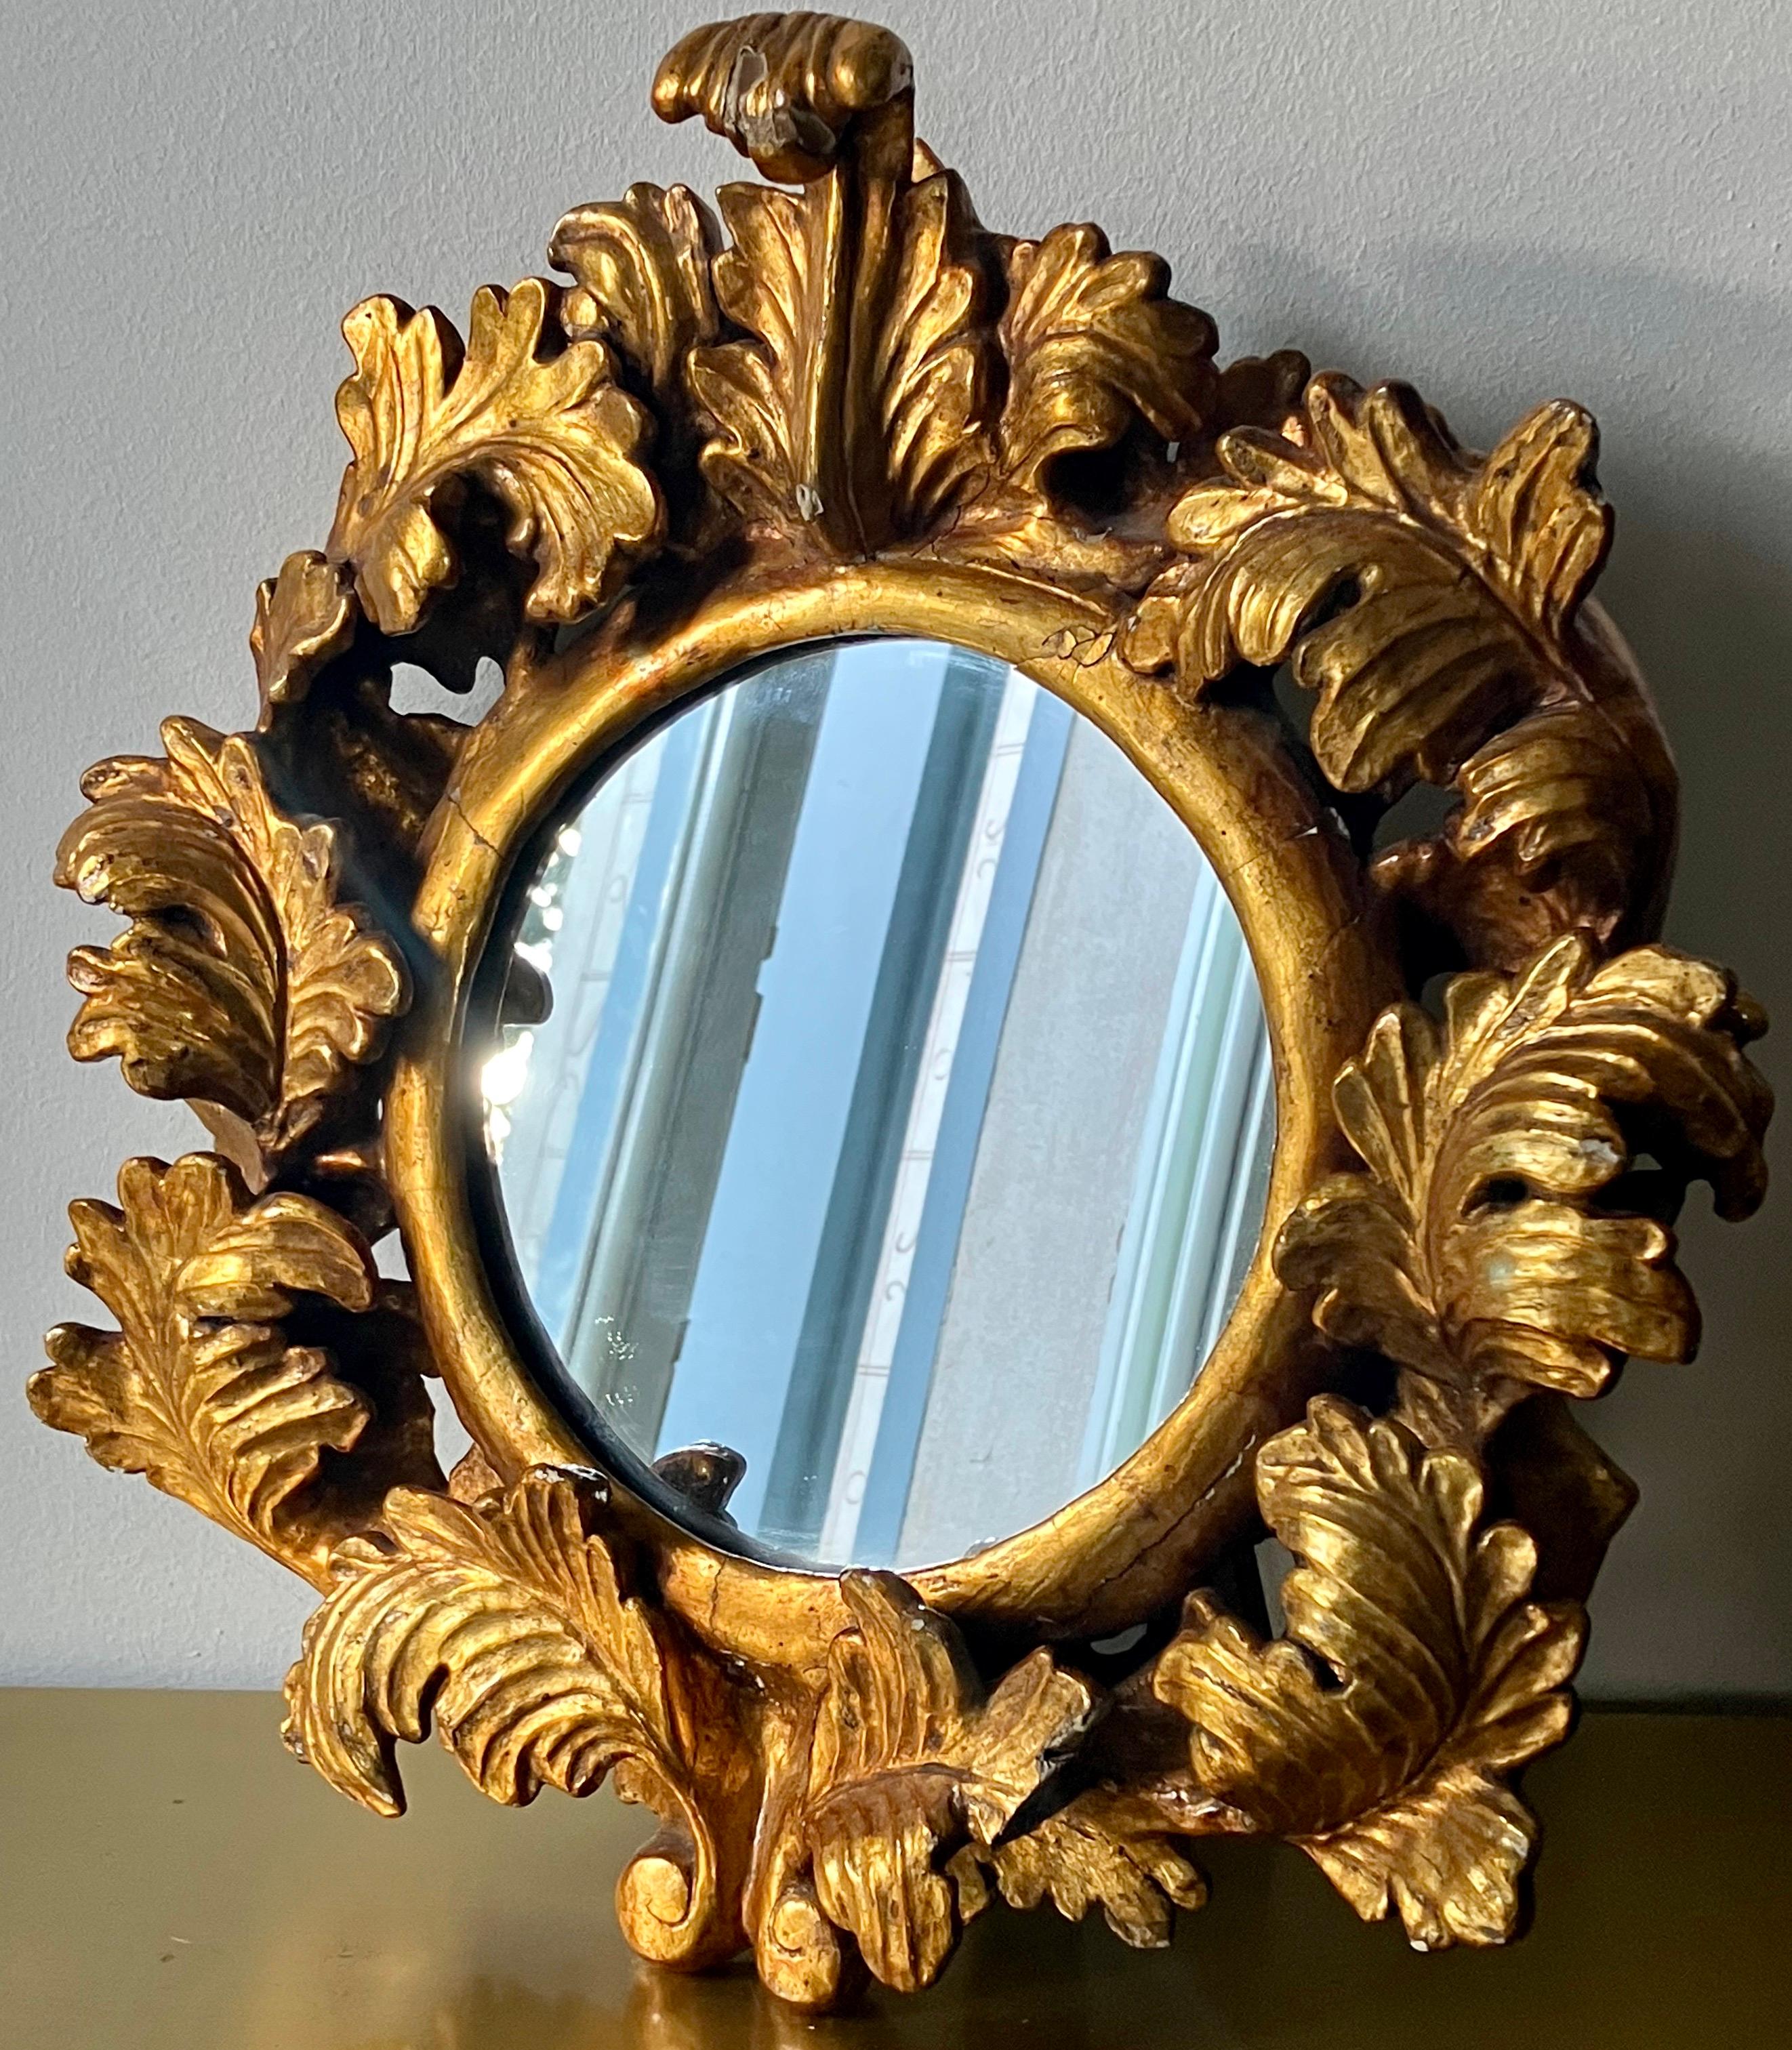 Original round mirror from 18th century with carved giltwood original feame. 
 Provenance: Sicily : 
ancient noble residence in Palermo. 

Some defects and lacks due to age. 
The rear support for adaptation to tabletop use, is not original.
(